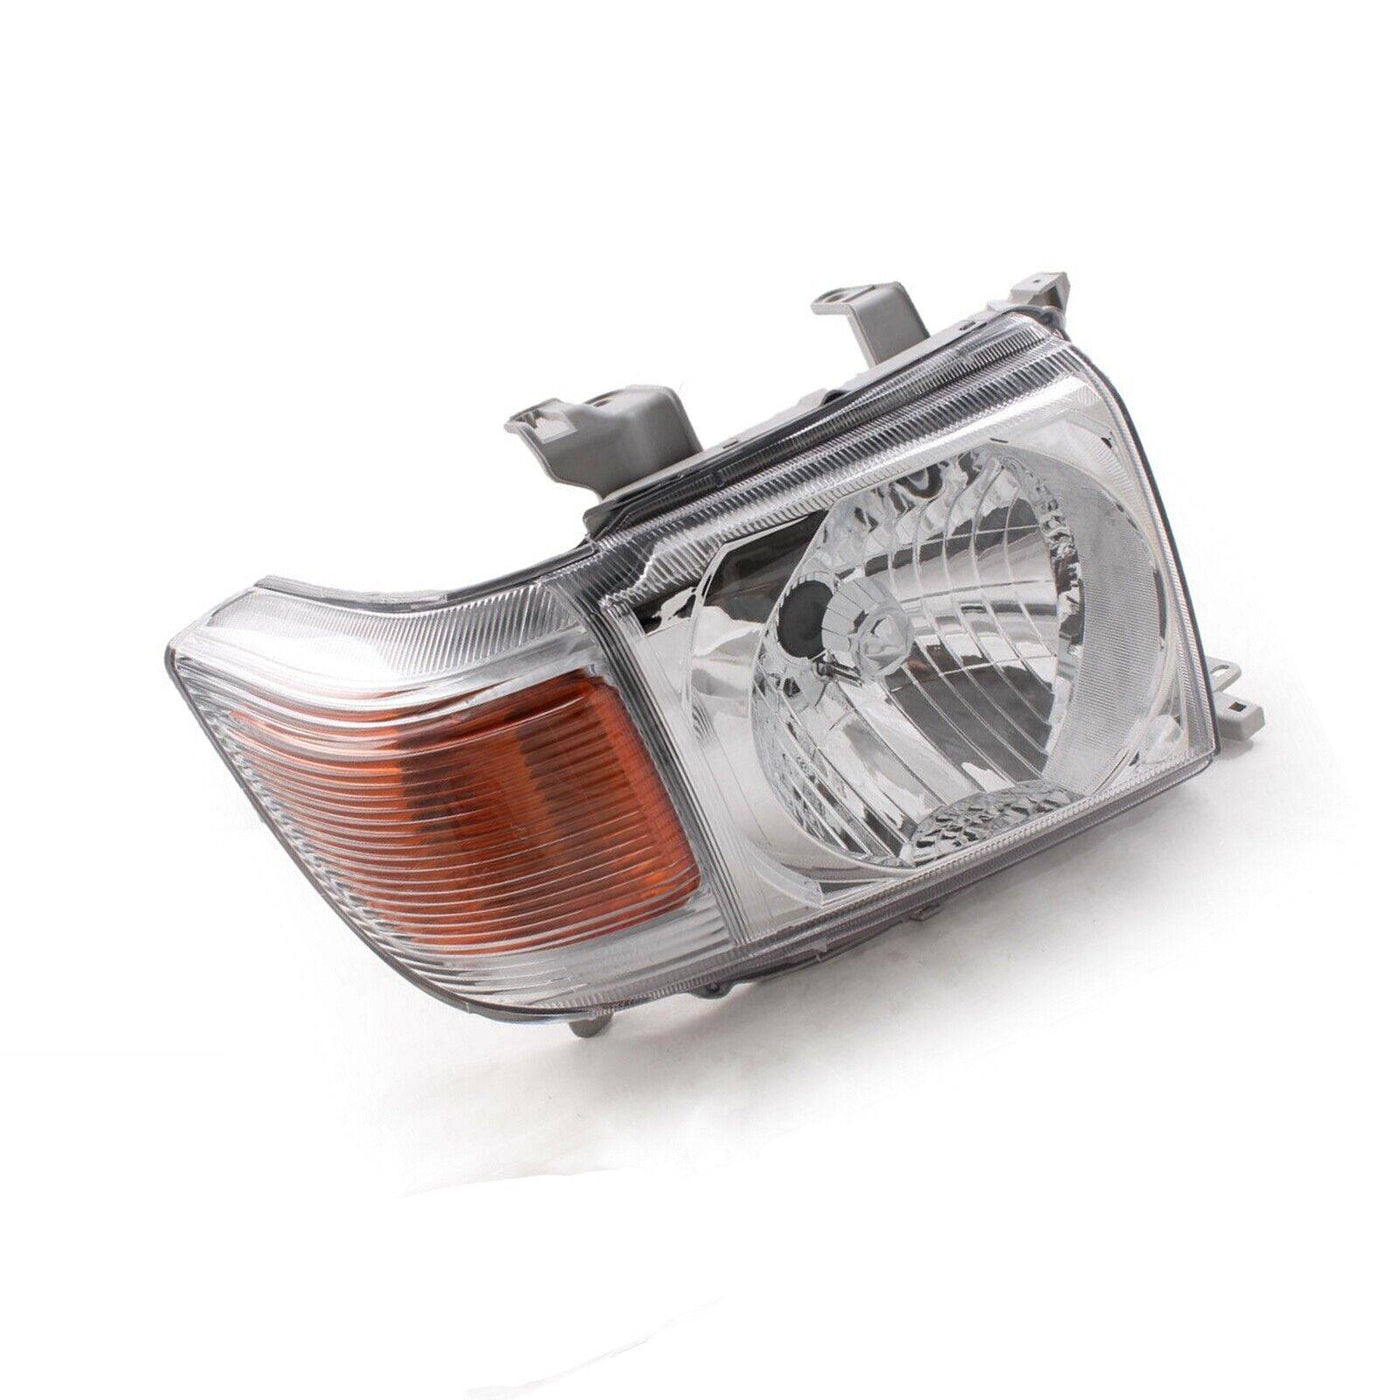 OEM Head Lights Right Side Driver suits Toyota Landcruiser 79,78,76 Series 2007+ (Online Only) - OZI4X4 PTY LTD